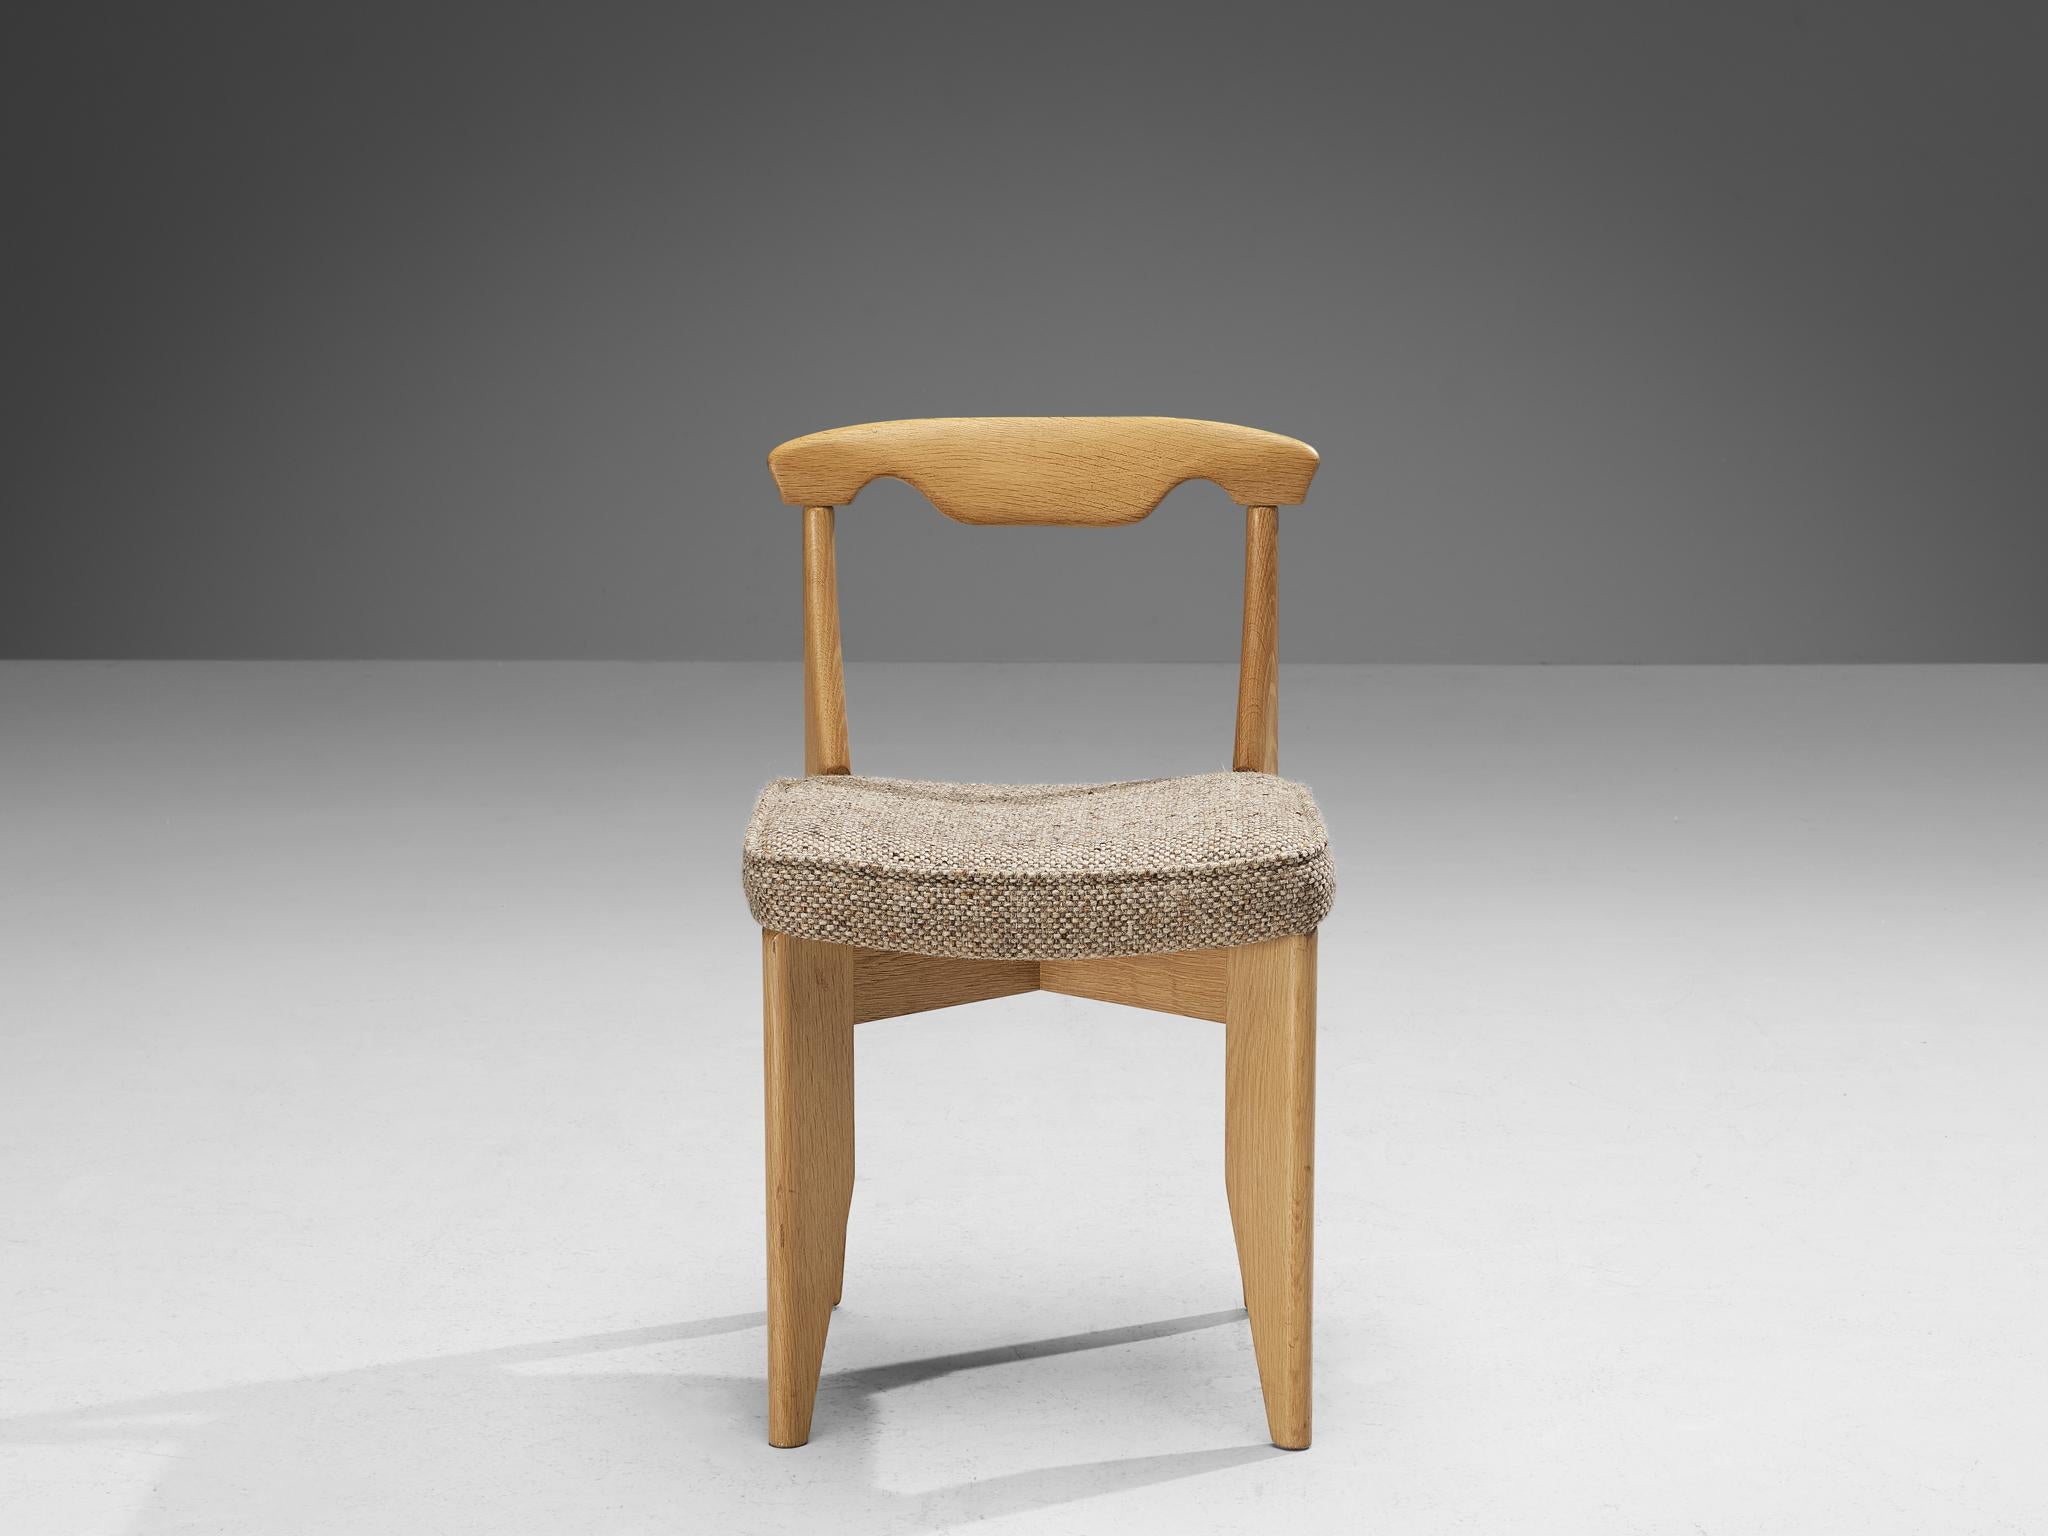 Guillerme & Chambron for Votre Maison, 'Aurelie' dining chair, oak, wool, France, 1960s

Rare pair of dining chairs designed by French duo Guillerme & Chambron for Votre Maison. These chairs show the characteristic framework of this French designer